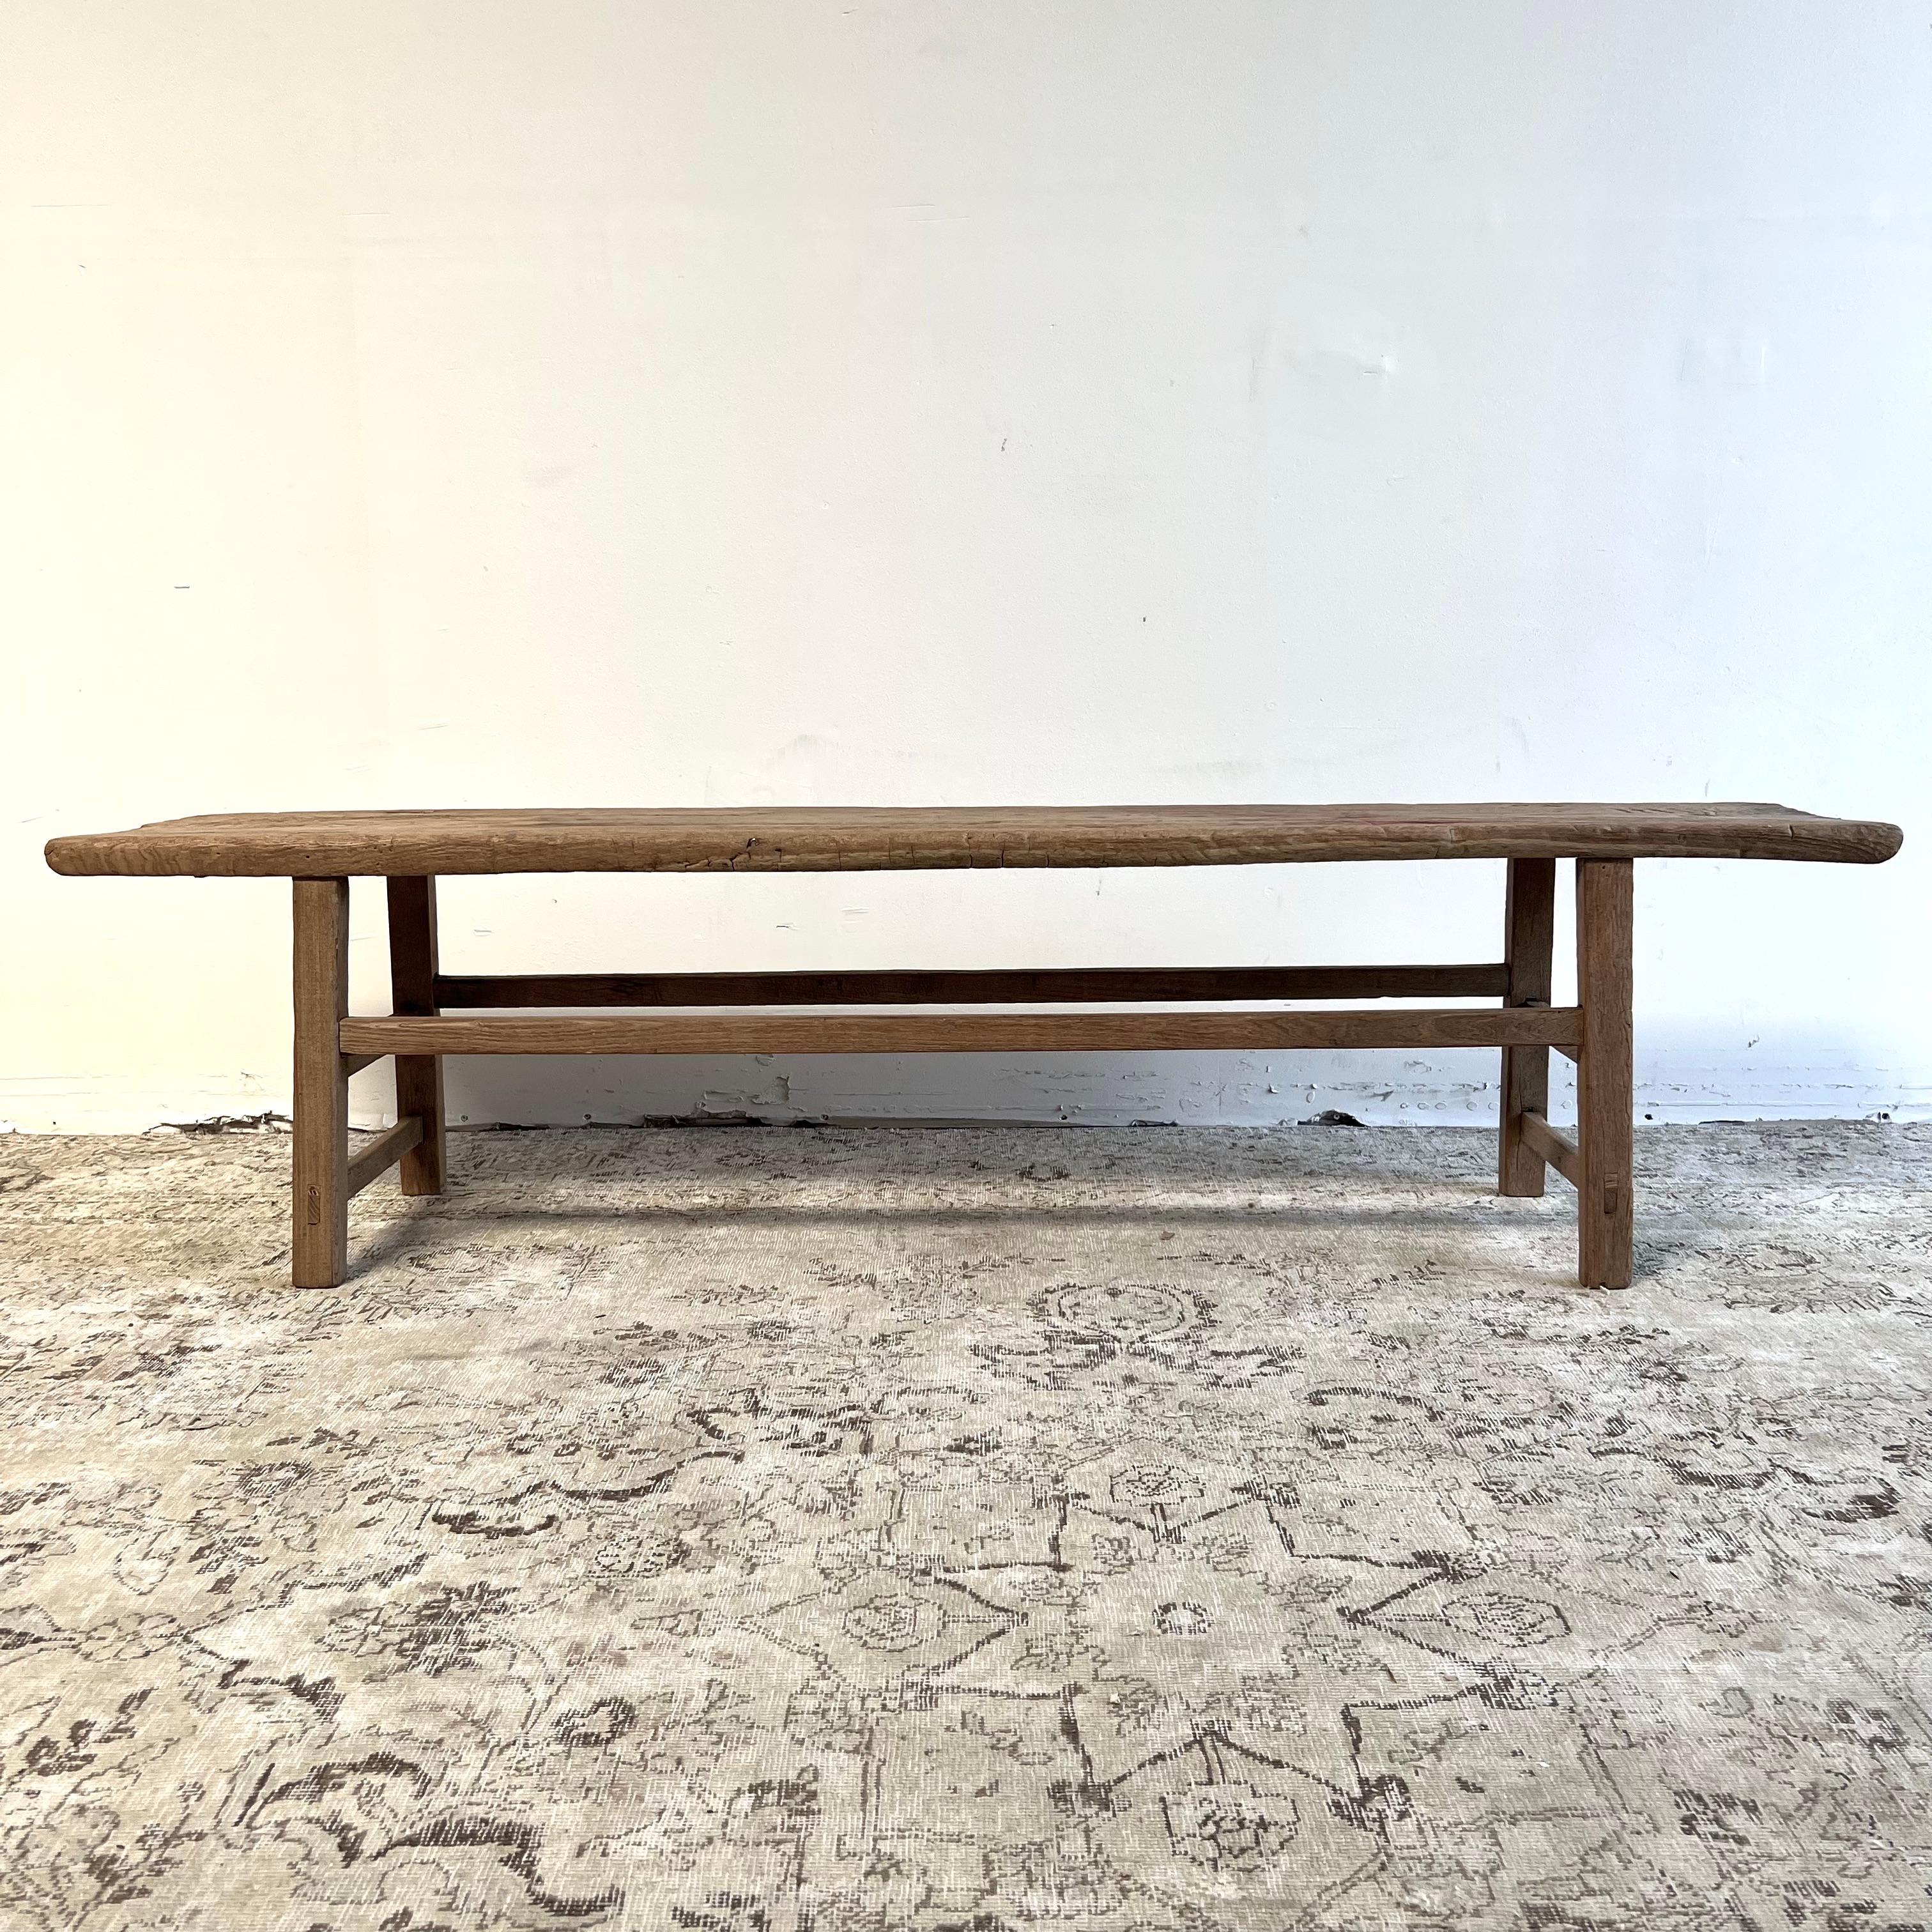 Vintage Elm Wood Coffee Table or Bench In Good Condition For Sale In Brea, CA